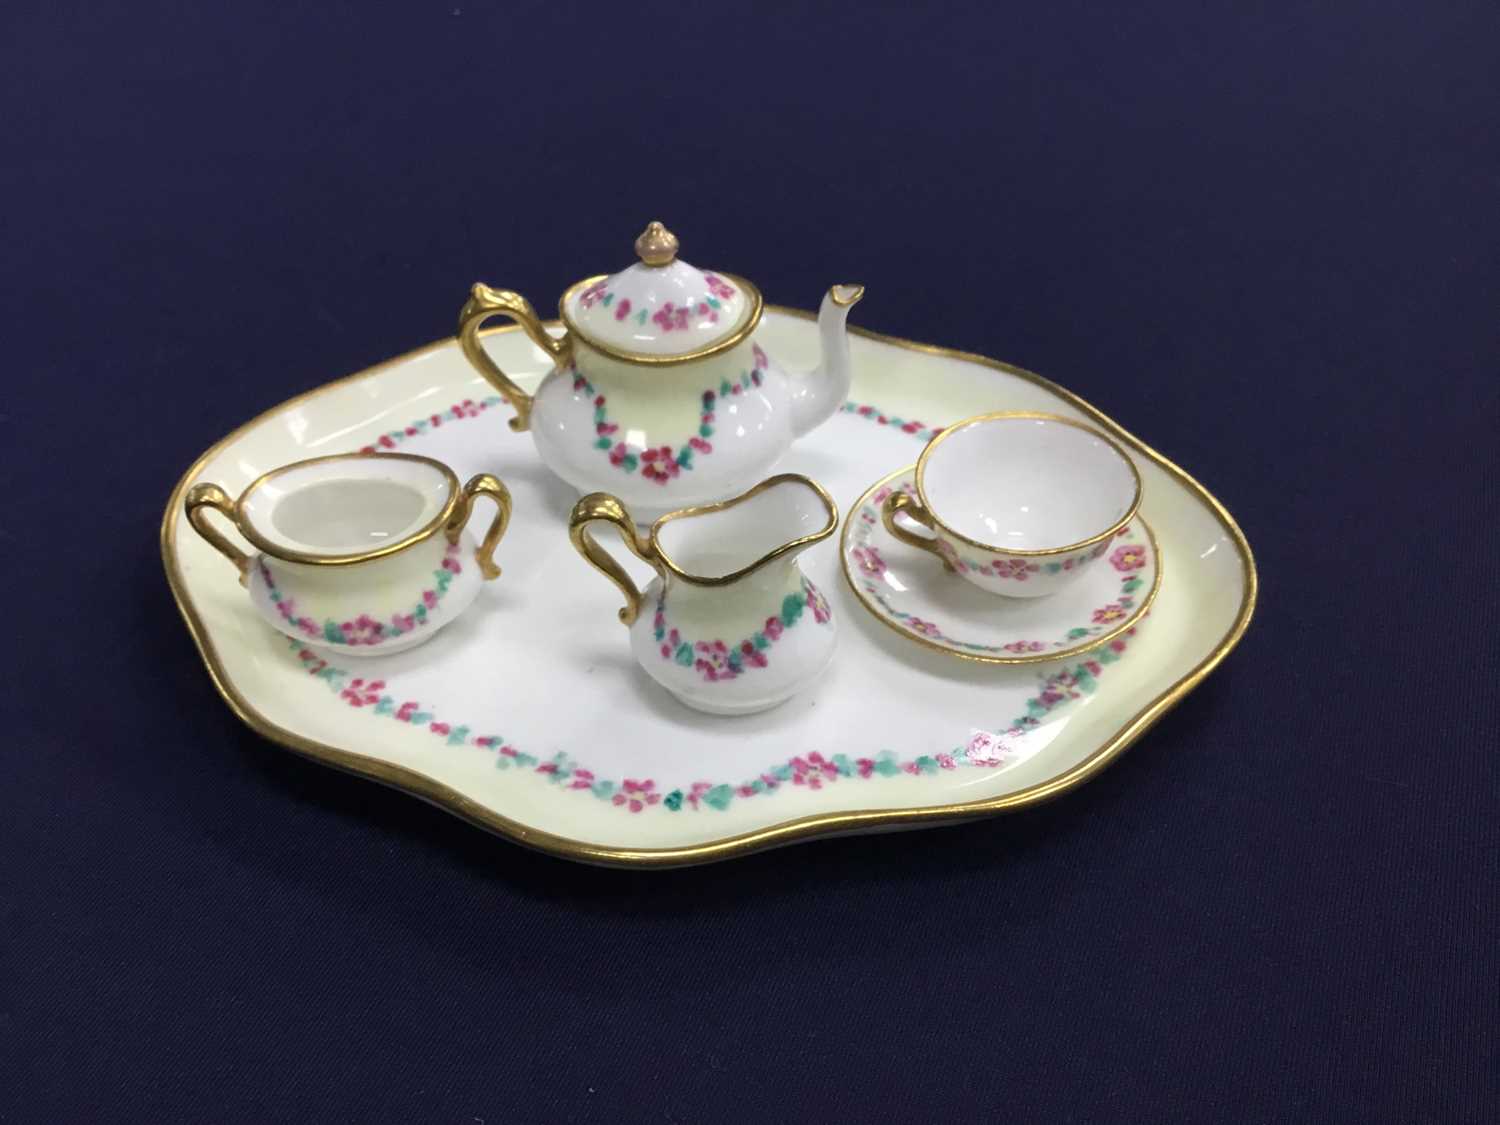 Lot 57 - A CROWN STAFFORDSHIRE MINIATURE TEA SET, ALONG WITH OTHER CERAMICS